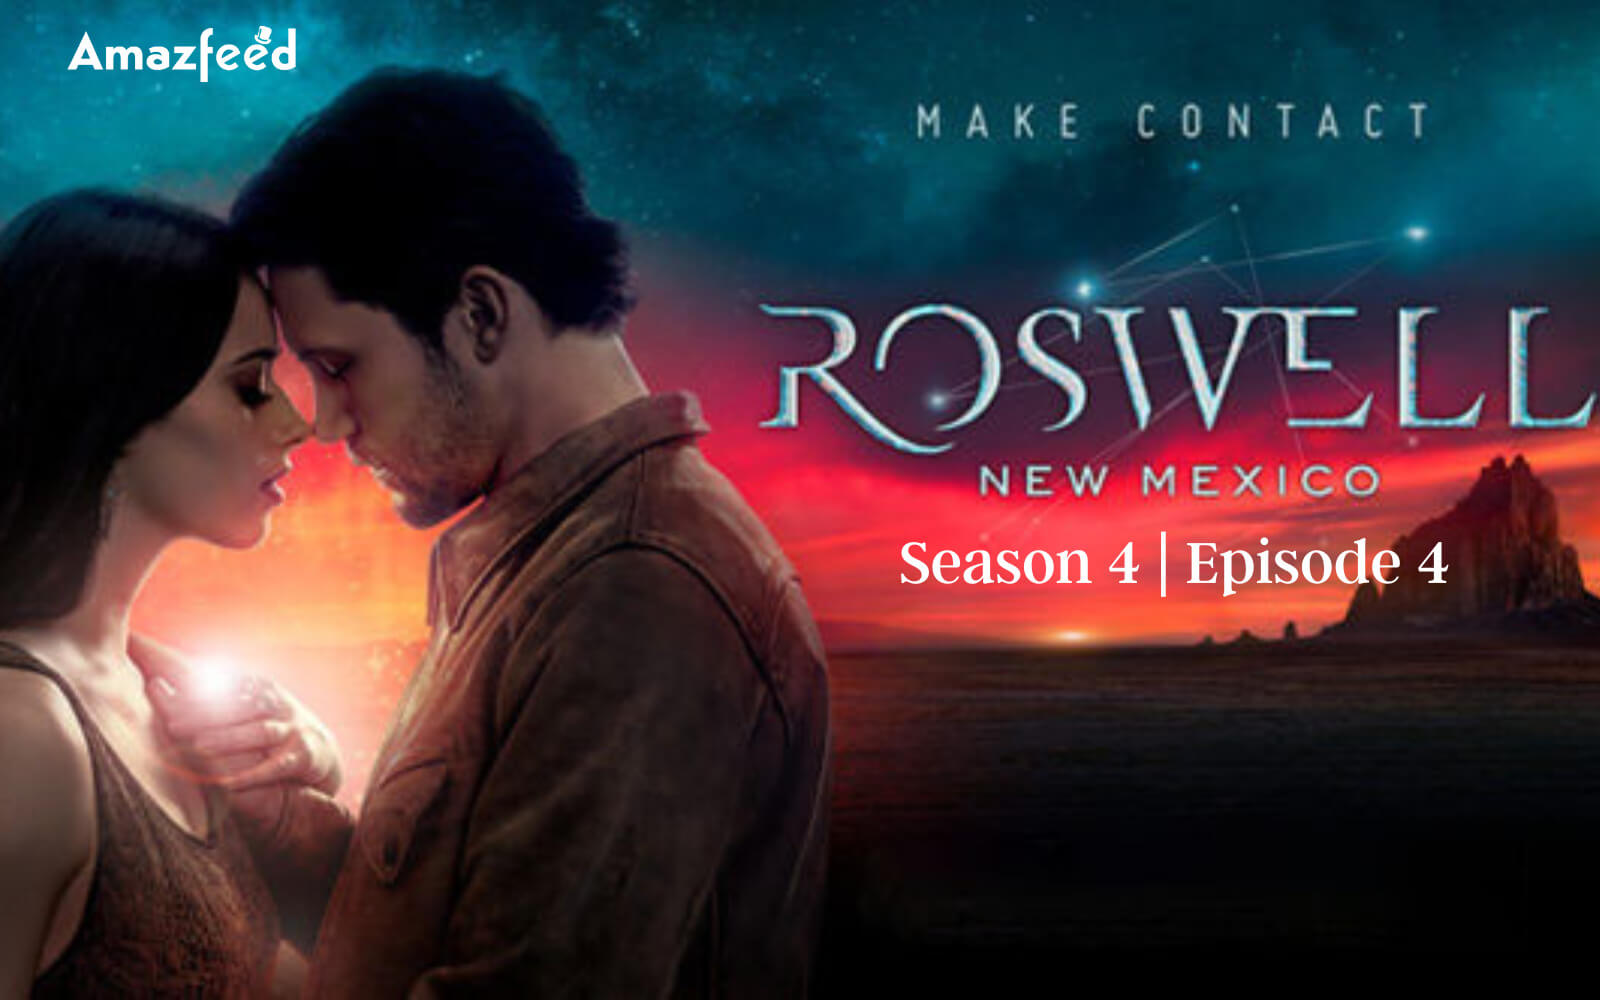 Roswell New Mexico Season 4 Episode 4 Release date